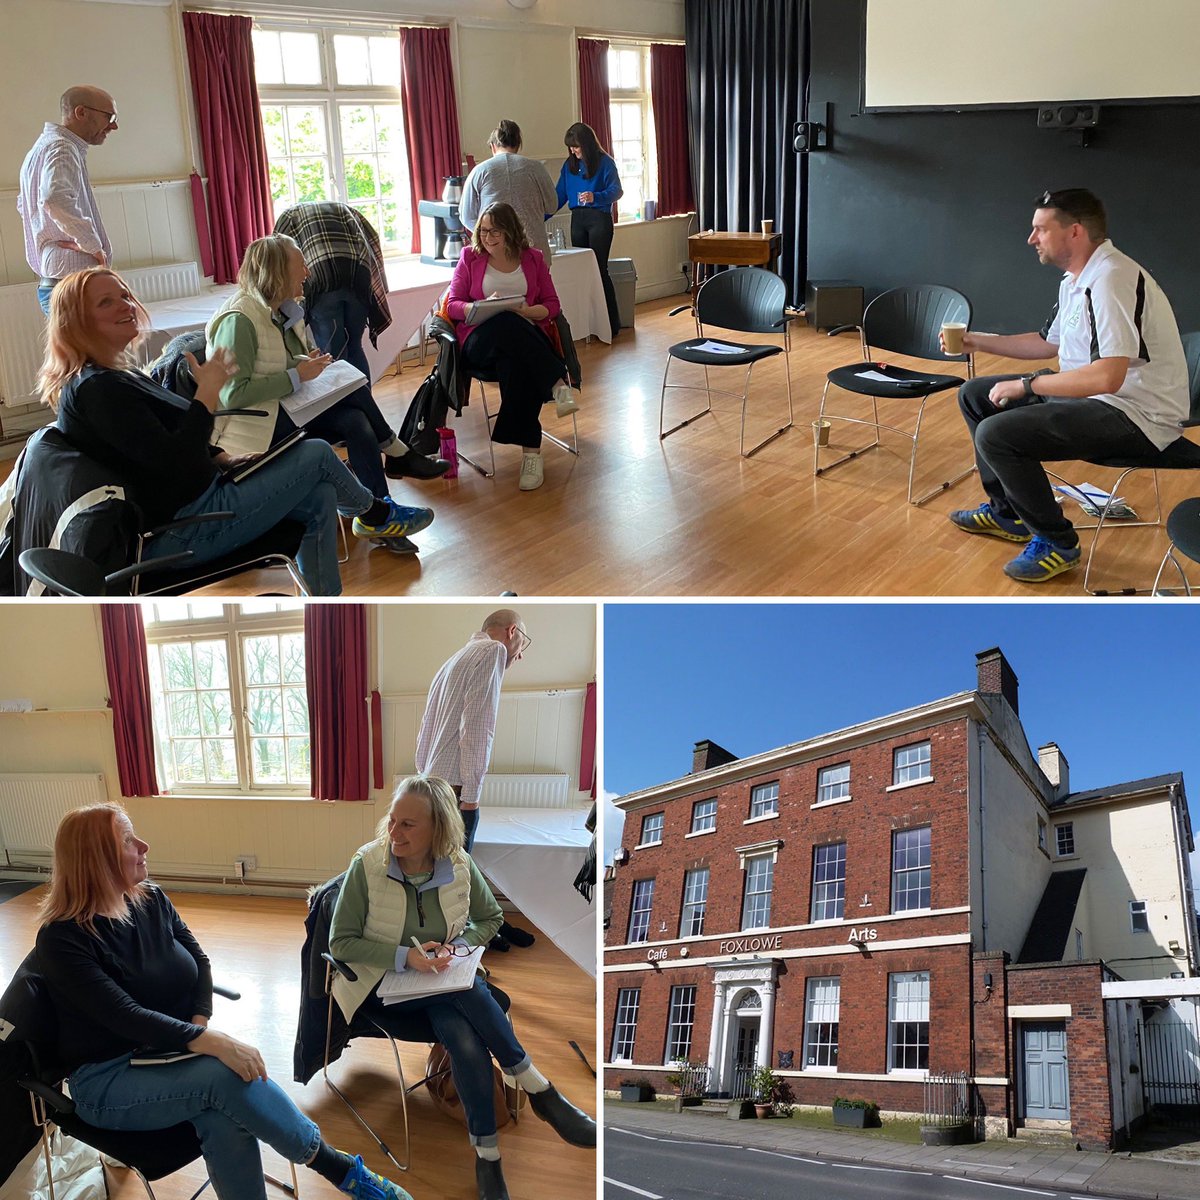 It was great to facilitate such an engaging business network here in Leek, Staffordshire yesterday. The topic (winning work from the private and public sectors) seemed to resonate with the small businesses attending, and I look forward to the next events on the 10 and 24 April